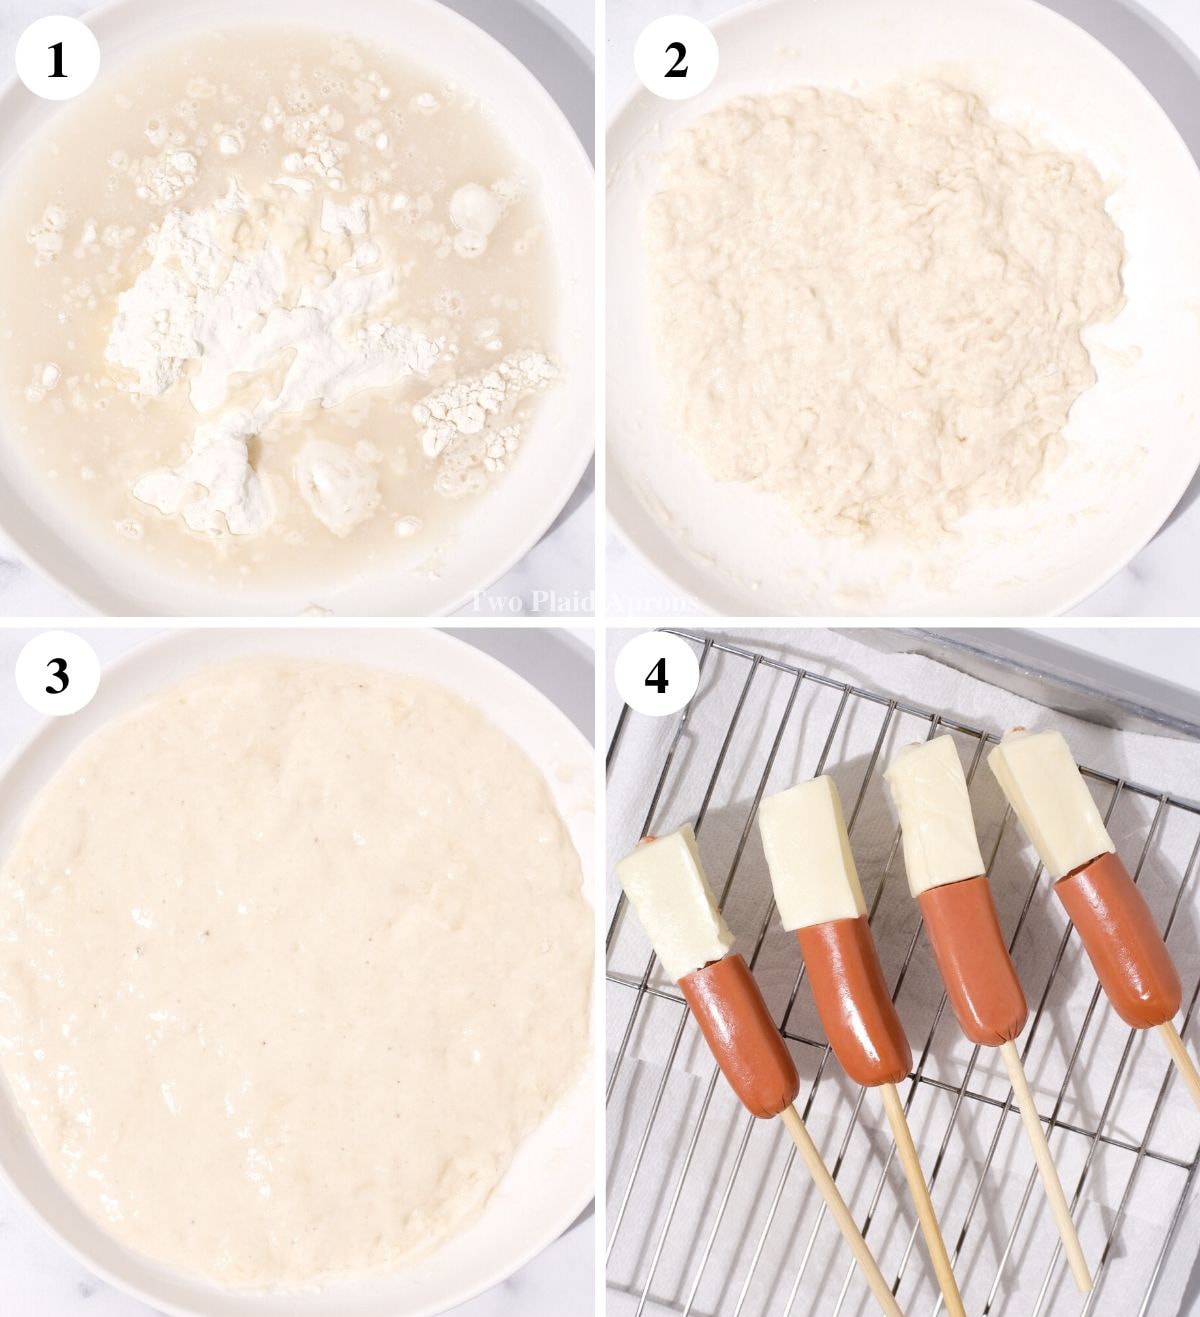 Step by step of making the yeast batter and assembling cheese corn dogs.